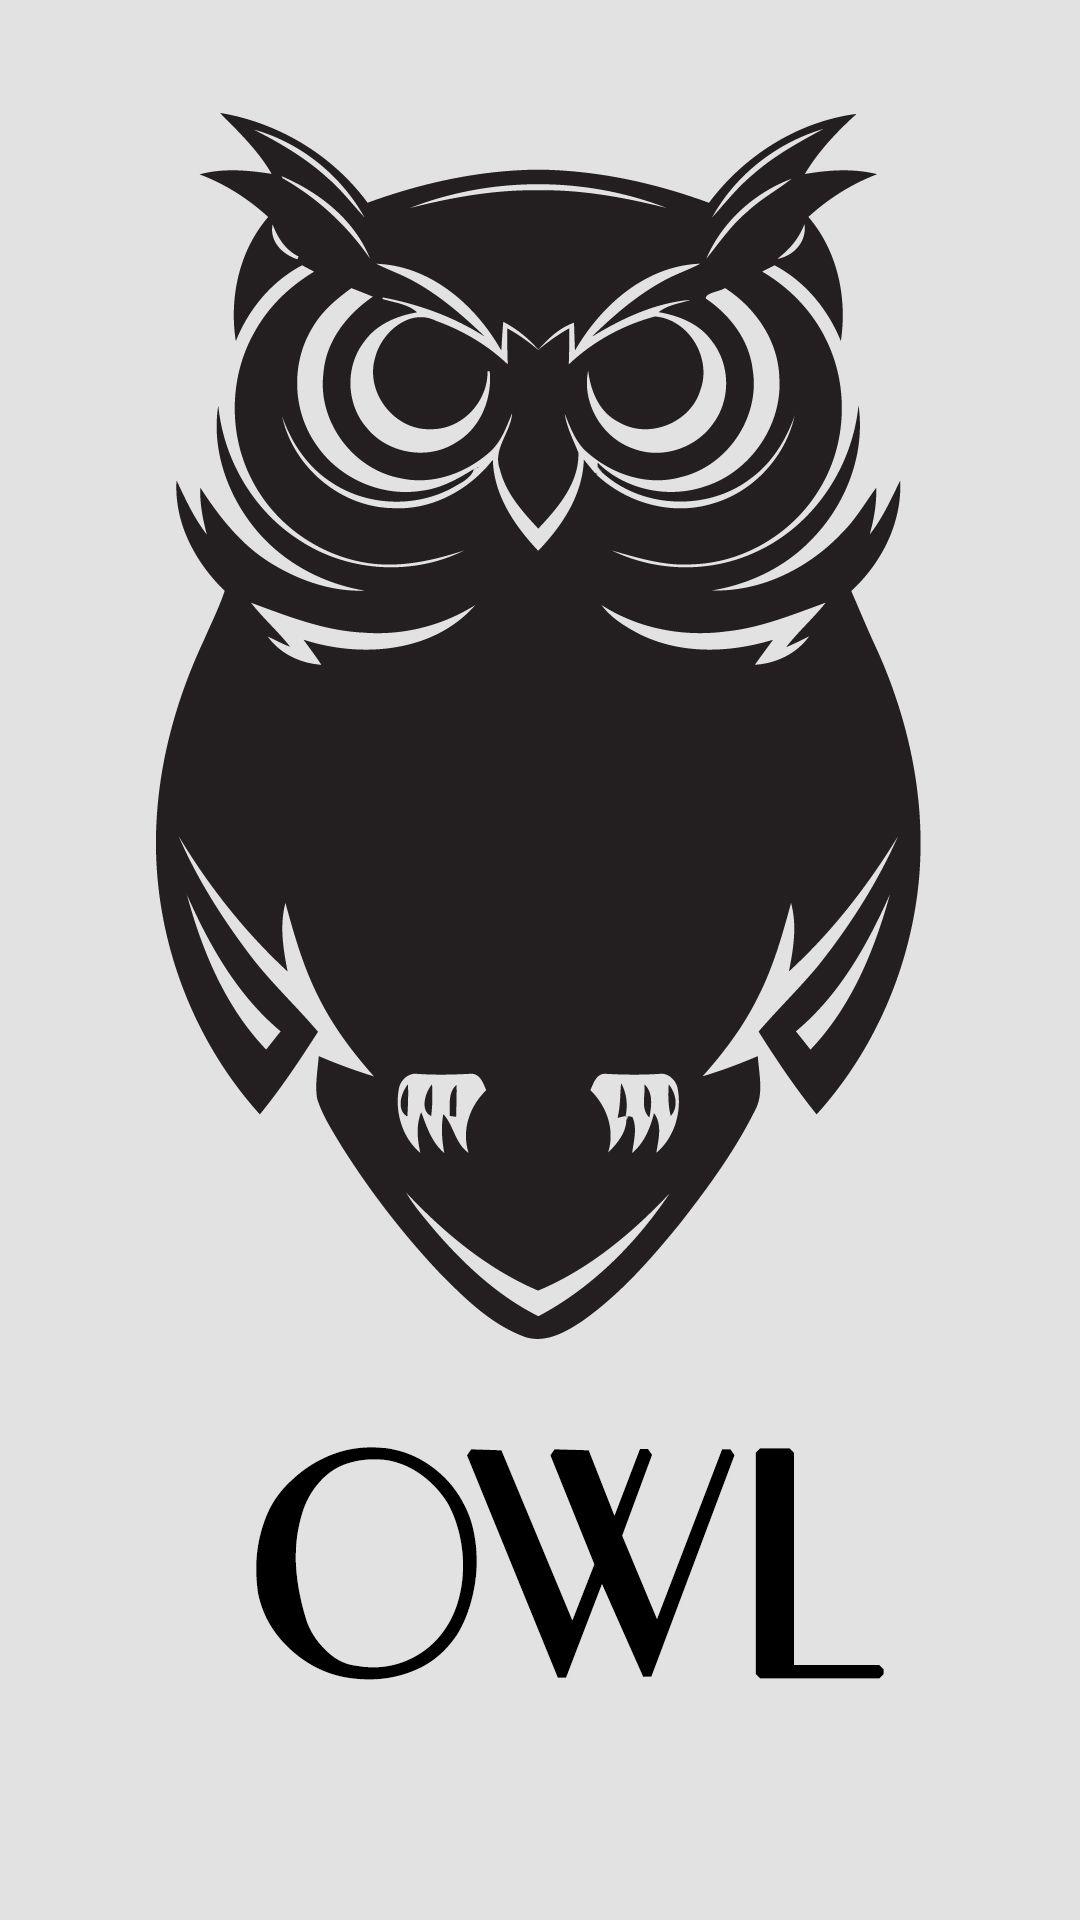 Download Free Cute Owl Wallpaper for Android. file